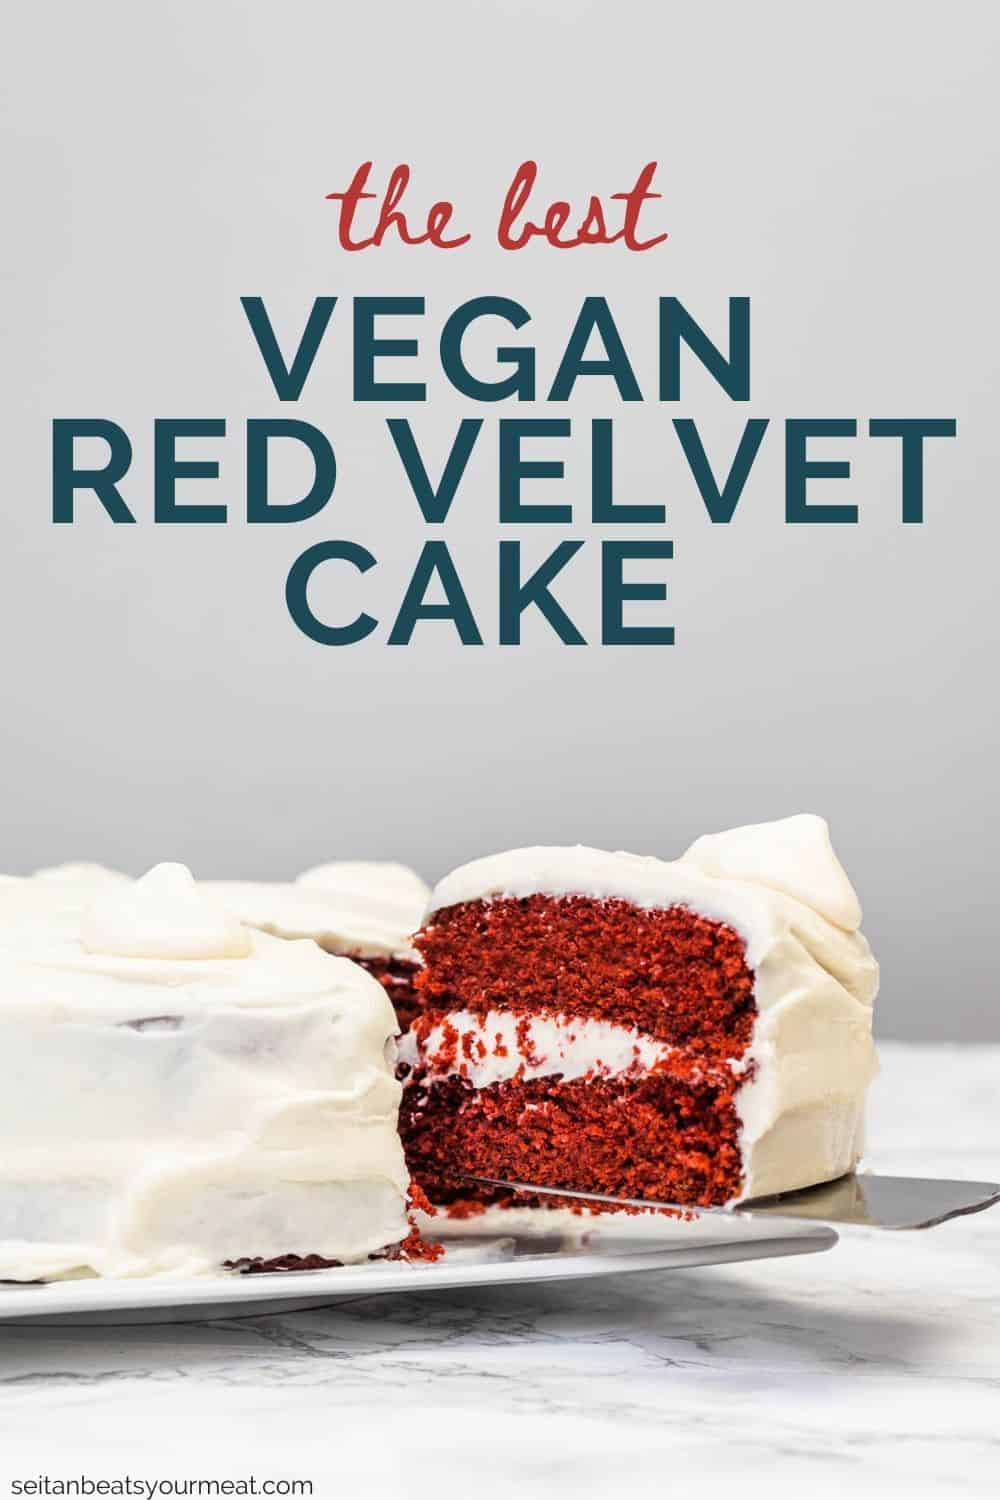 Slice of red velvet cake being lifted out of cake on plate with a cake server with text "The Best Vegan Red Velvet Cake"